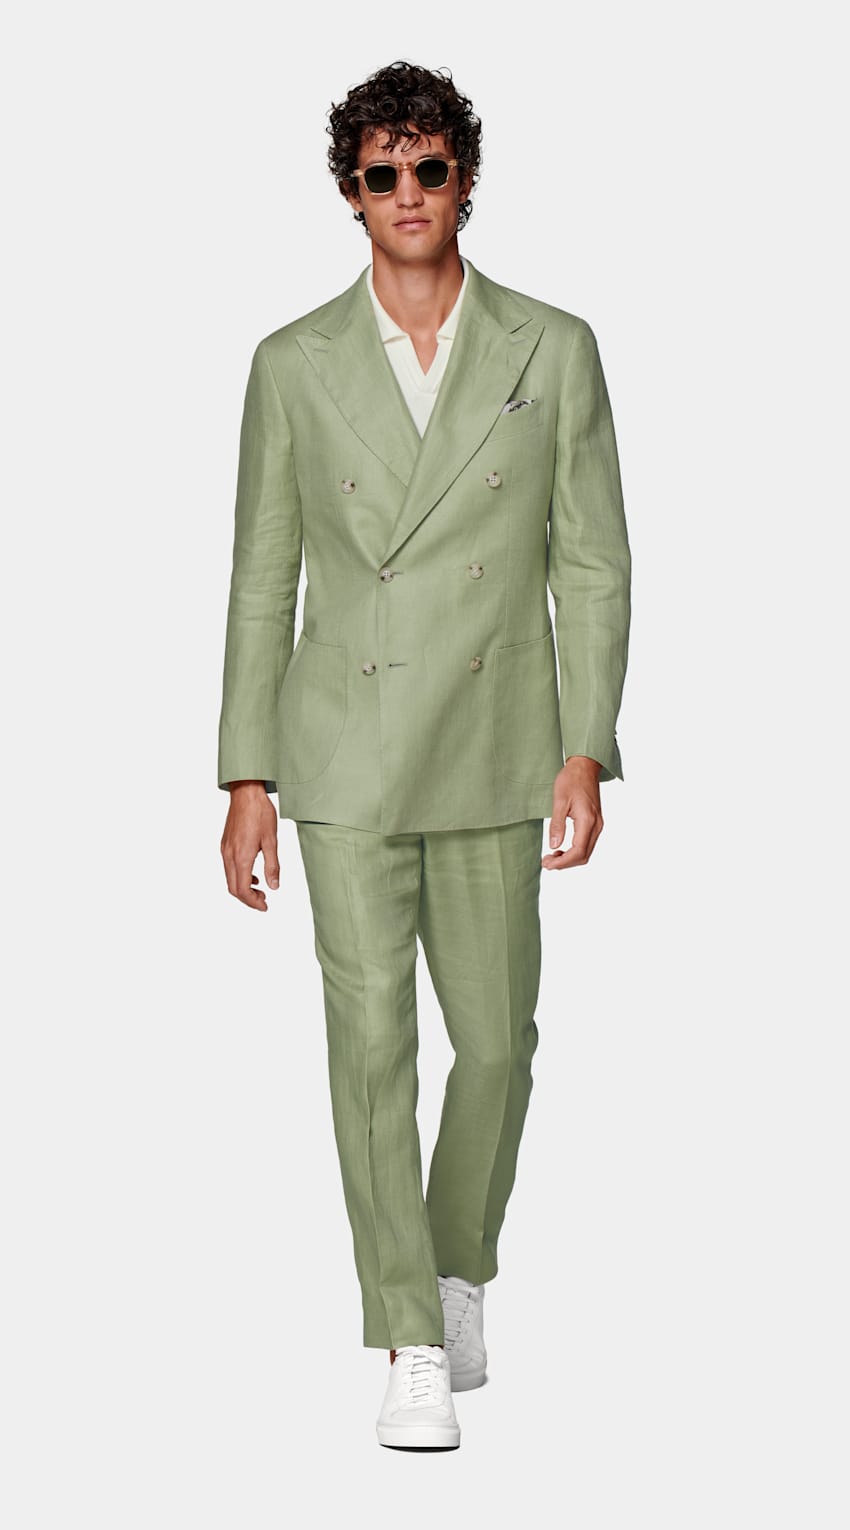 SUITSUPPLY Pur lin - Leomaster, Italie Costume Havana coupe Tailored vert clair